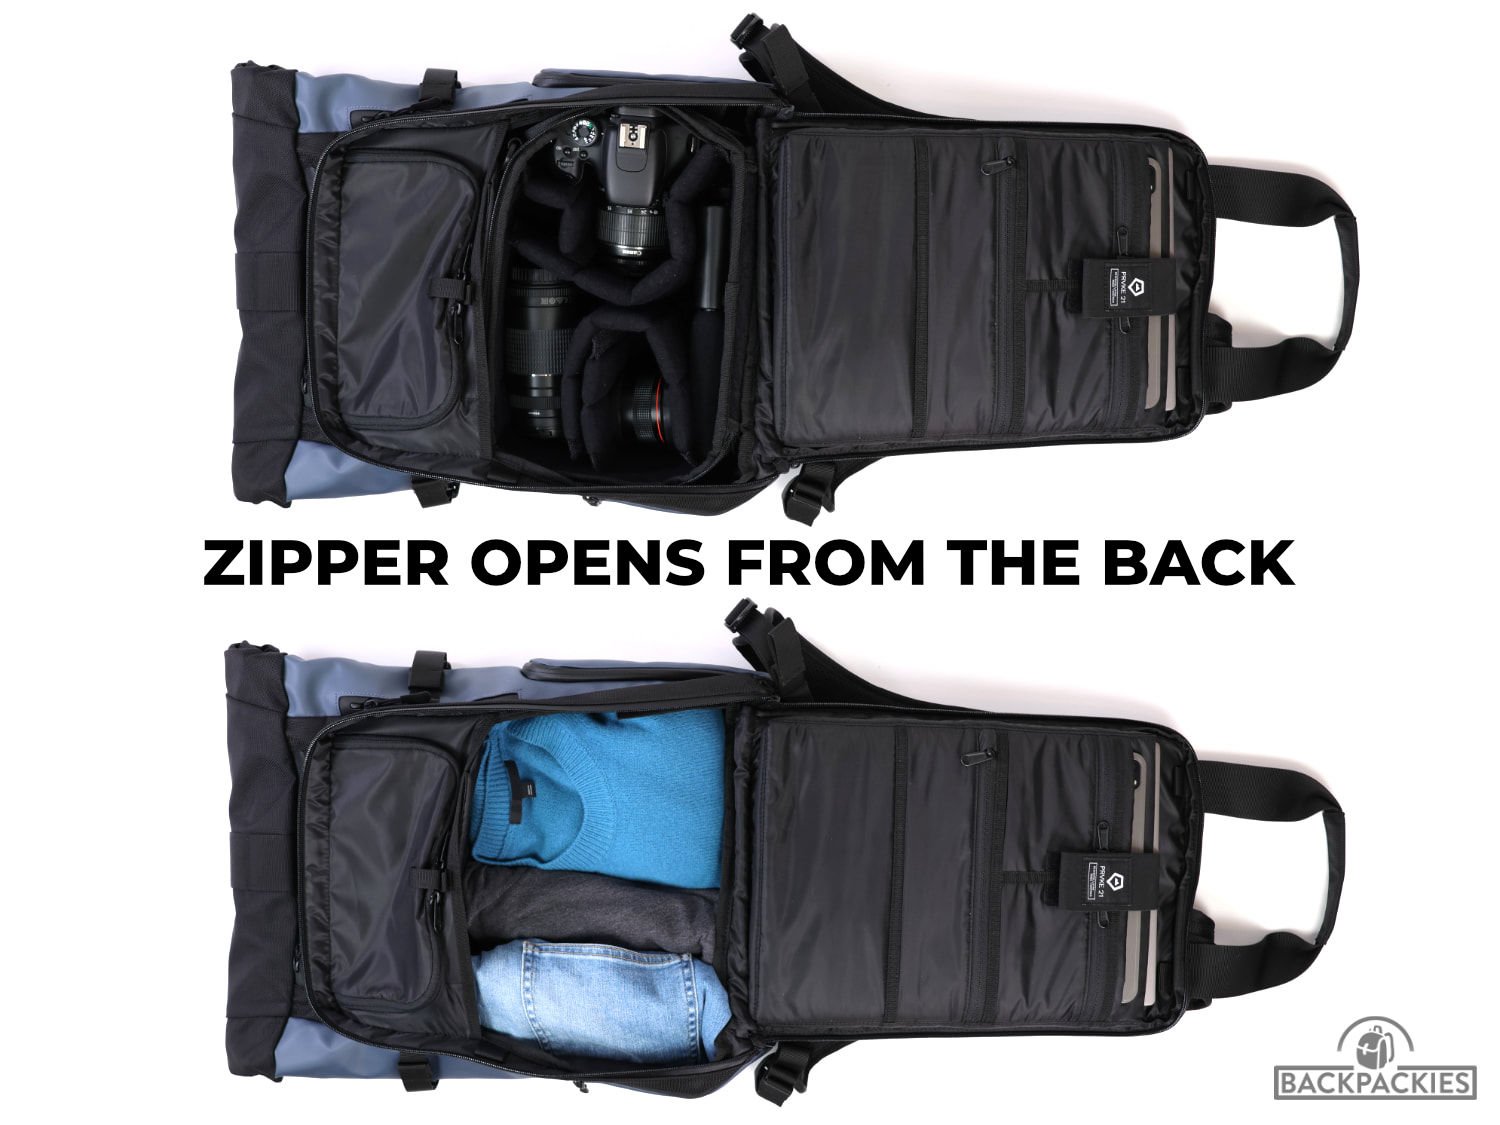 12 Backpacks with Zipper on Back (Rear Access Packs!)